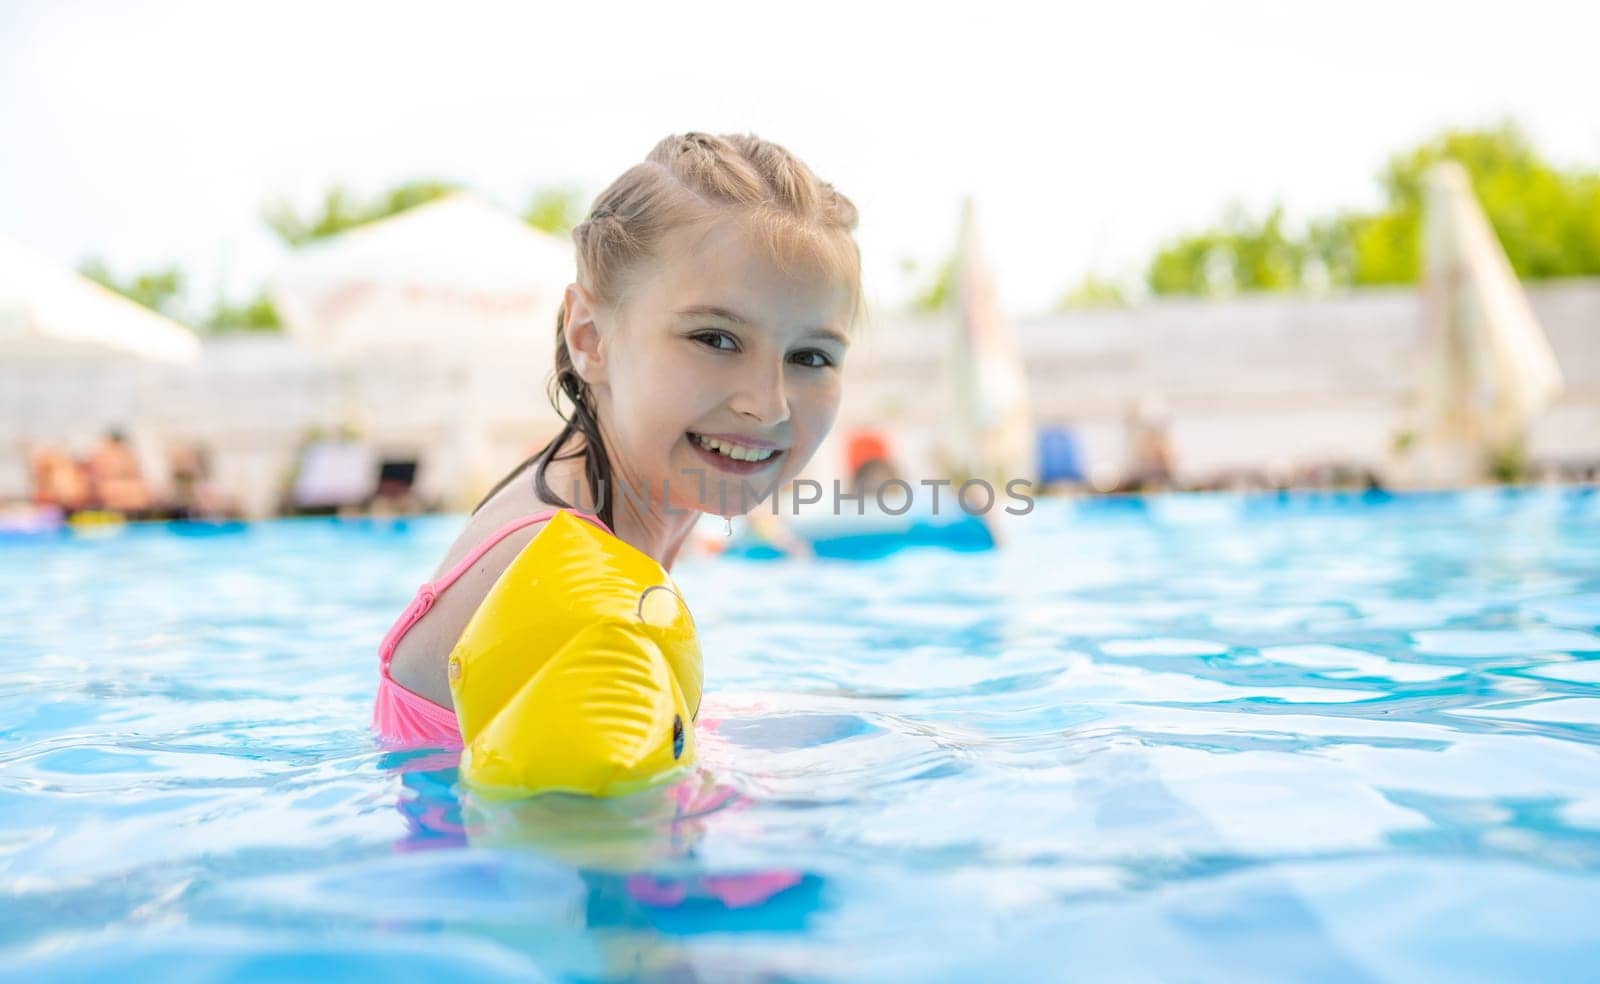 Little pretty girl kid in pool smiling and wearing colorful swimwear. Beautiful child enjoying summer holidays and swimming